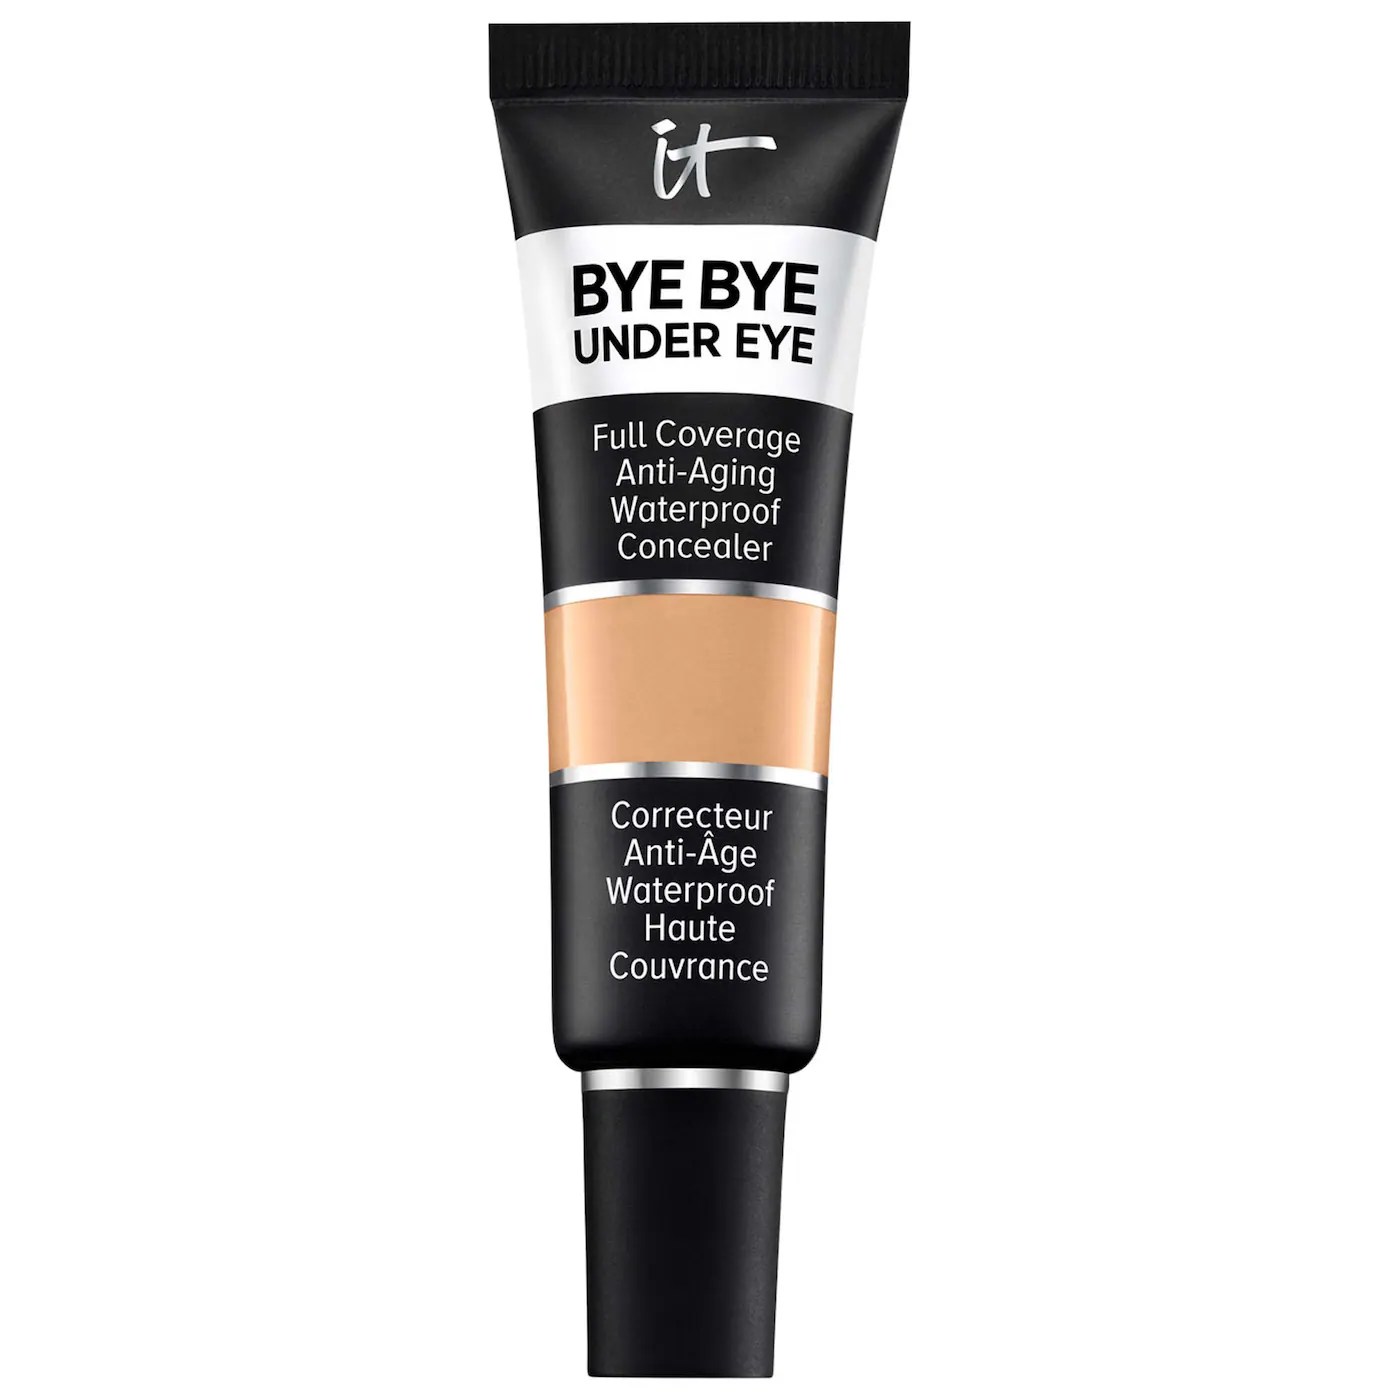 IT cosmetics bye bye under eye, one of the best under eye concealers for mature skin